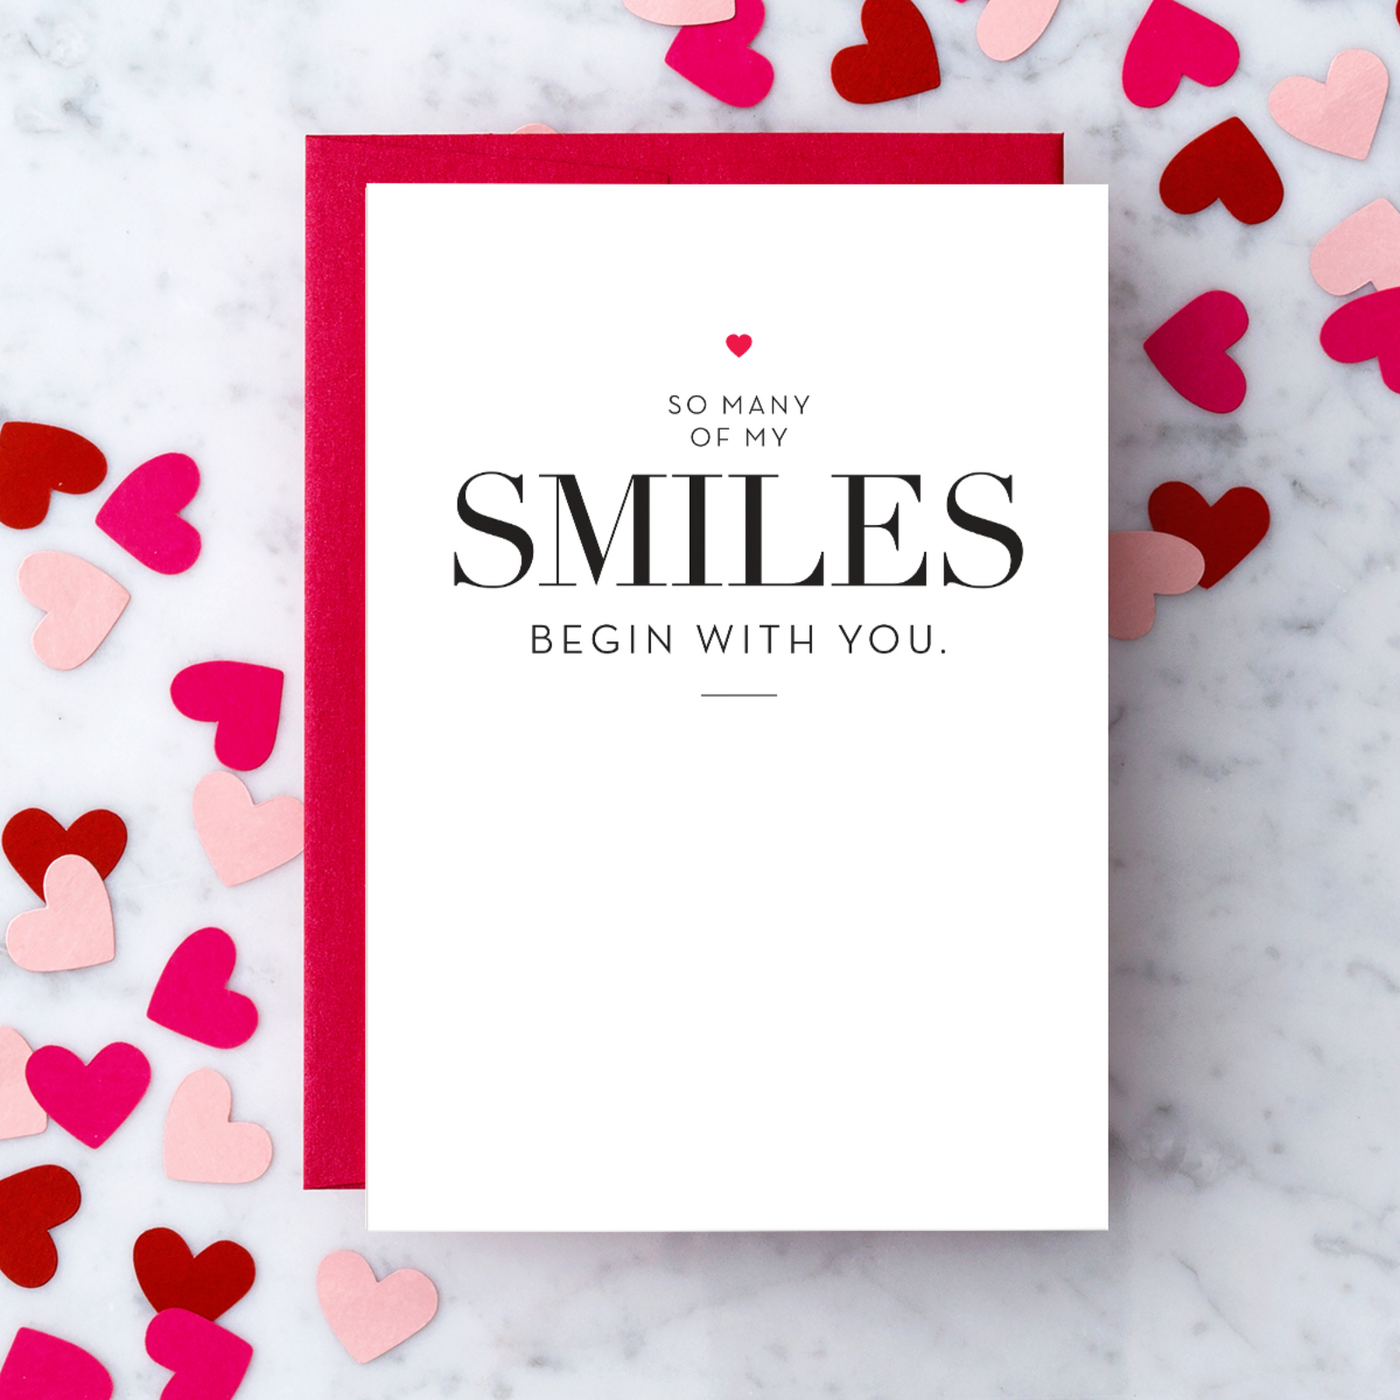 So Many Smiles Begin With You Greeting Card